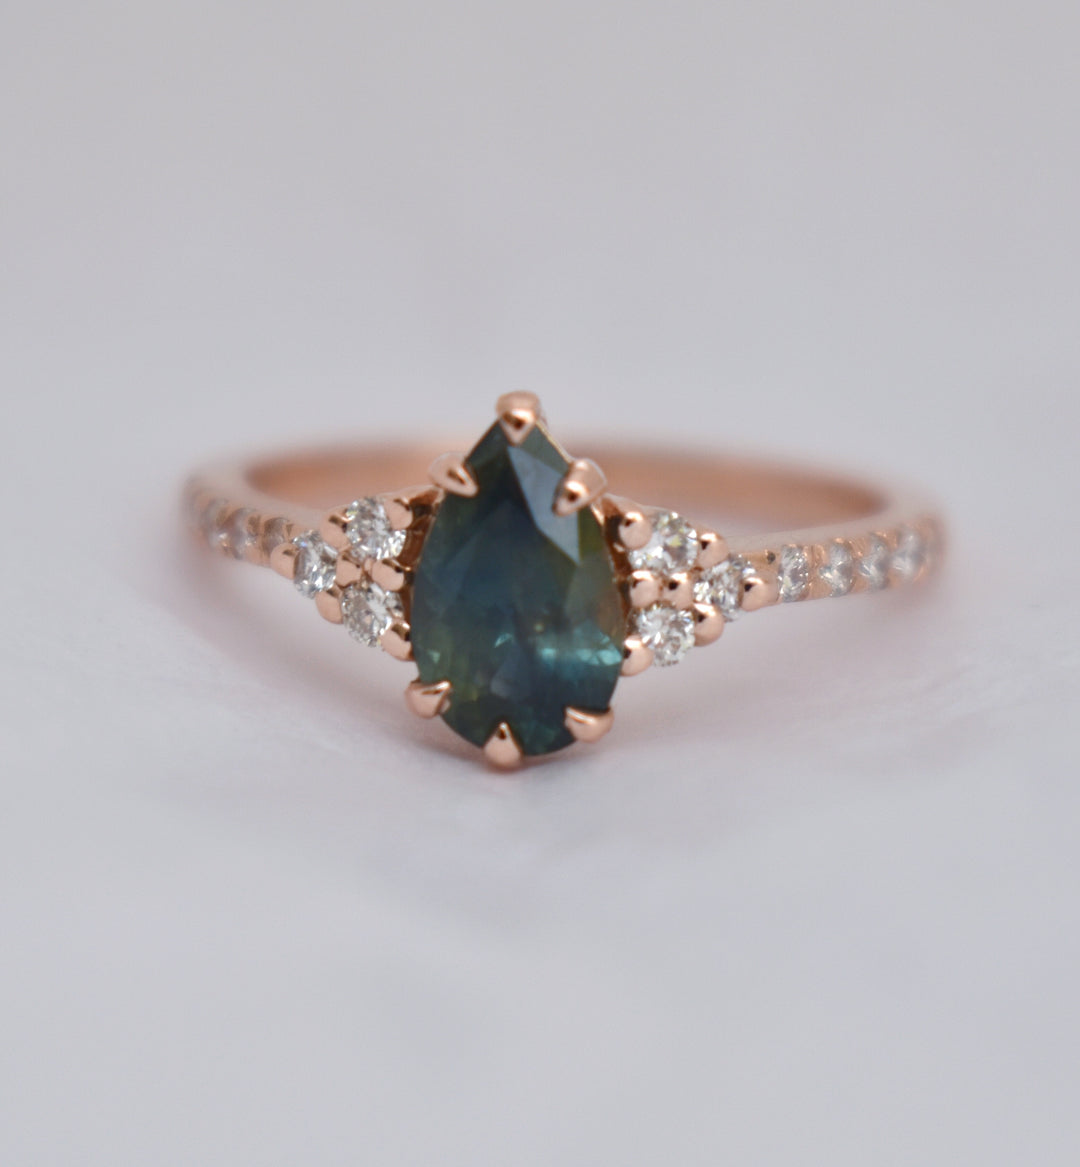 Pear Shape Green Sapphire Engagement Ring with Diamonds 14K Rose Gold